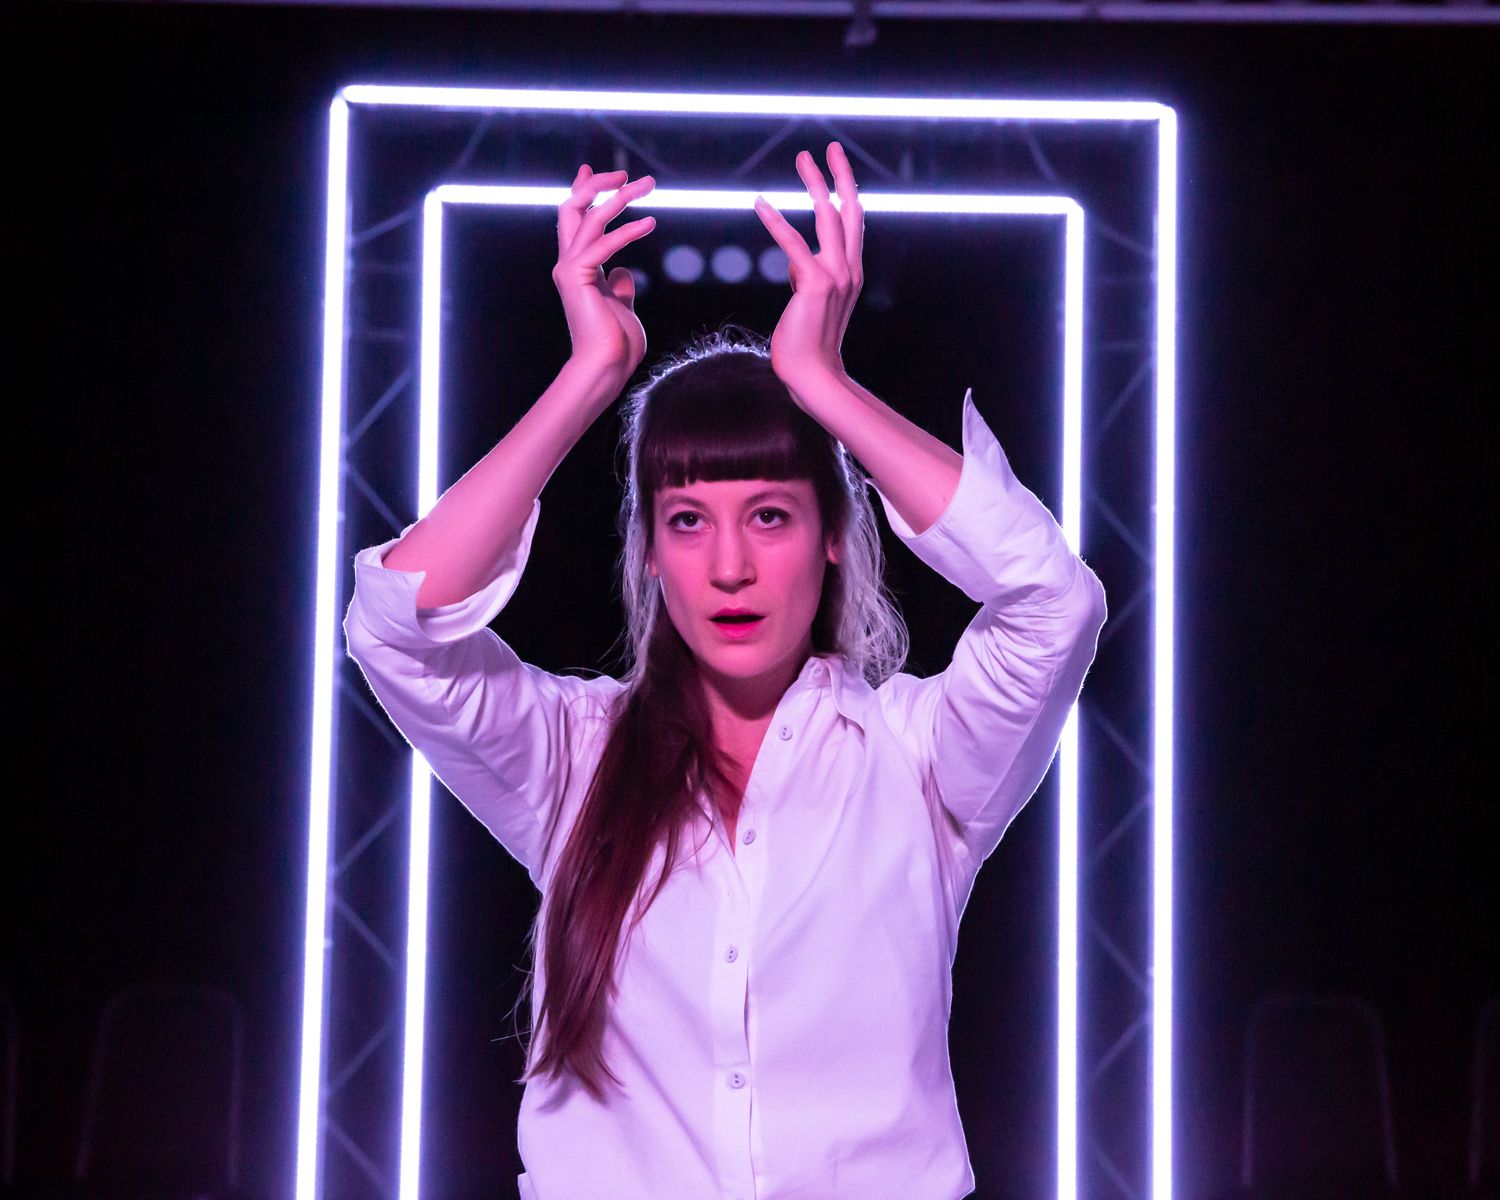 The actress of Antigone holding her hands up in front of some led doors